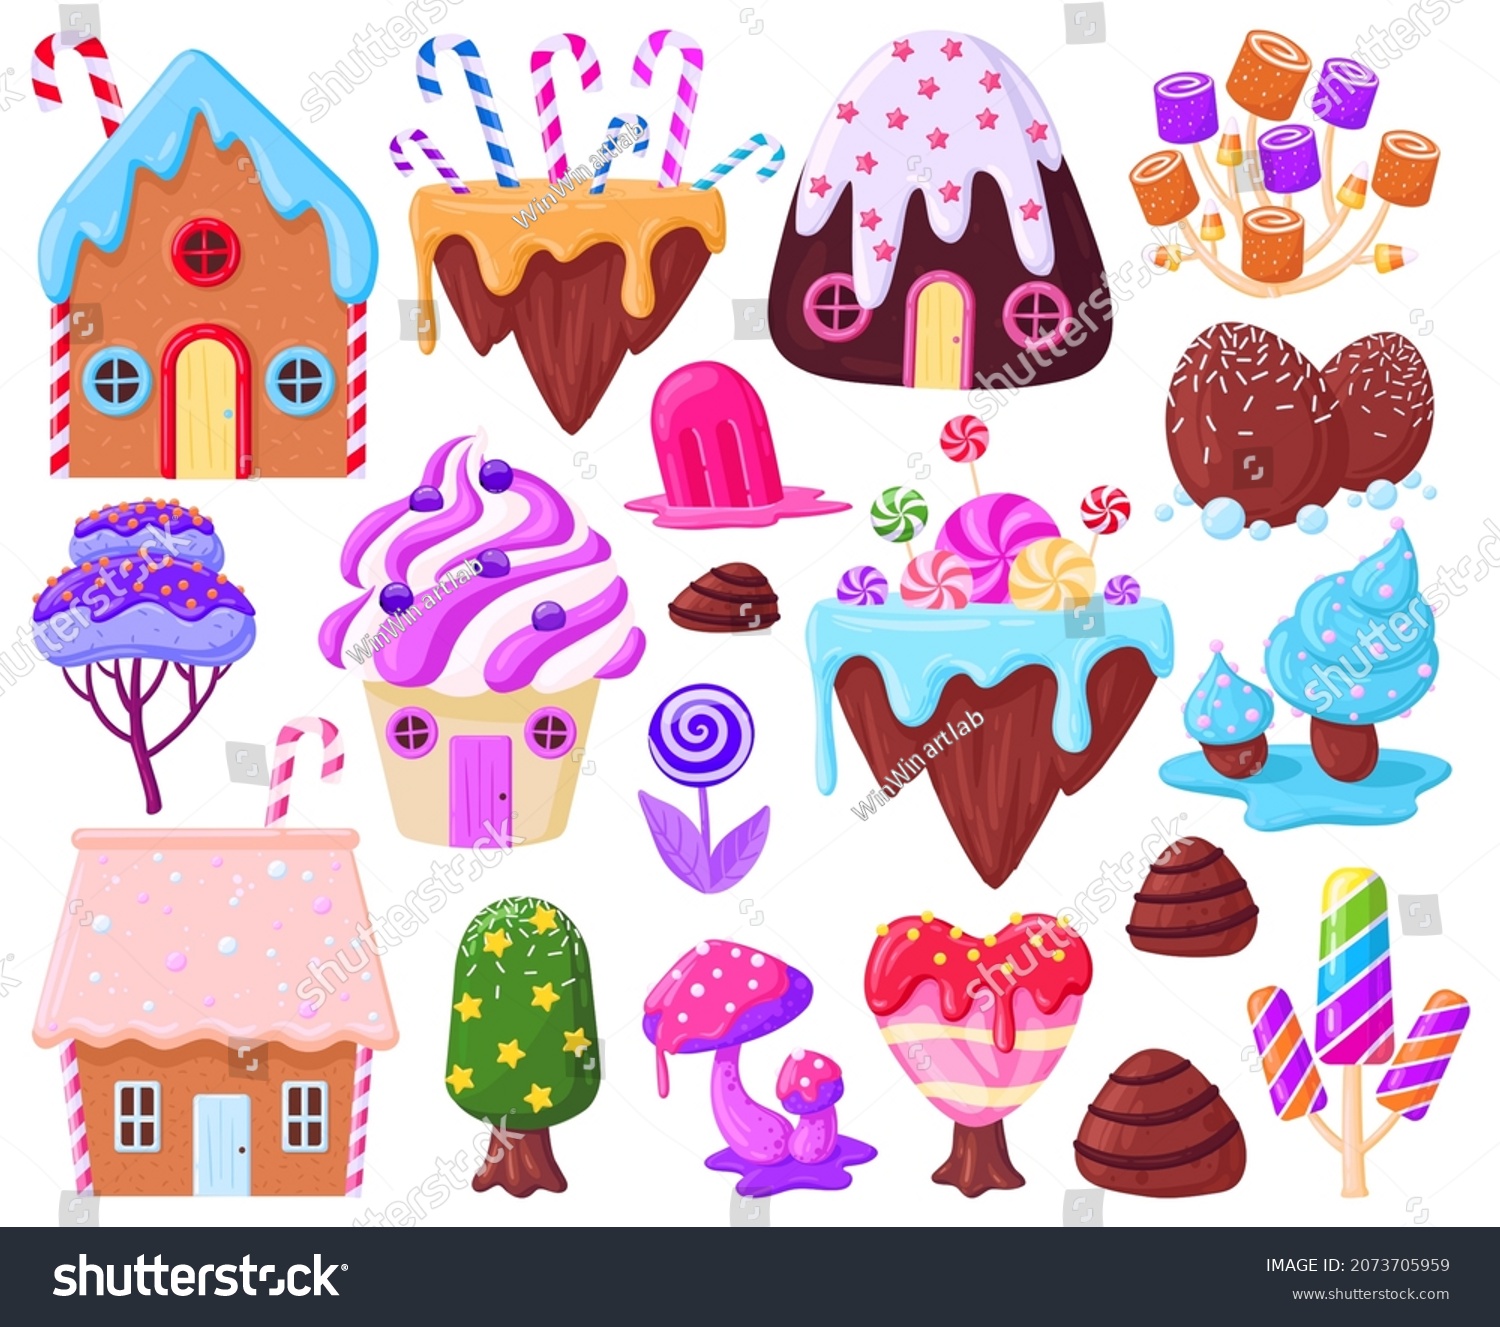 Cartoon sweet fantasy gingerbread houses and caramel trees. Fairy tale sweet candy land, biscuit houses, lollipop vector illustration set. Candy land elements. Cartoon food sweet cake, sugar candy #2073705959